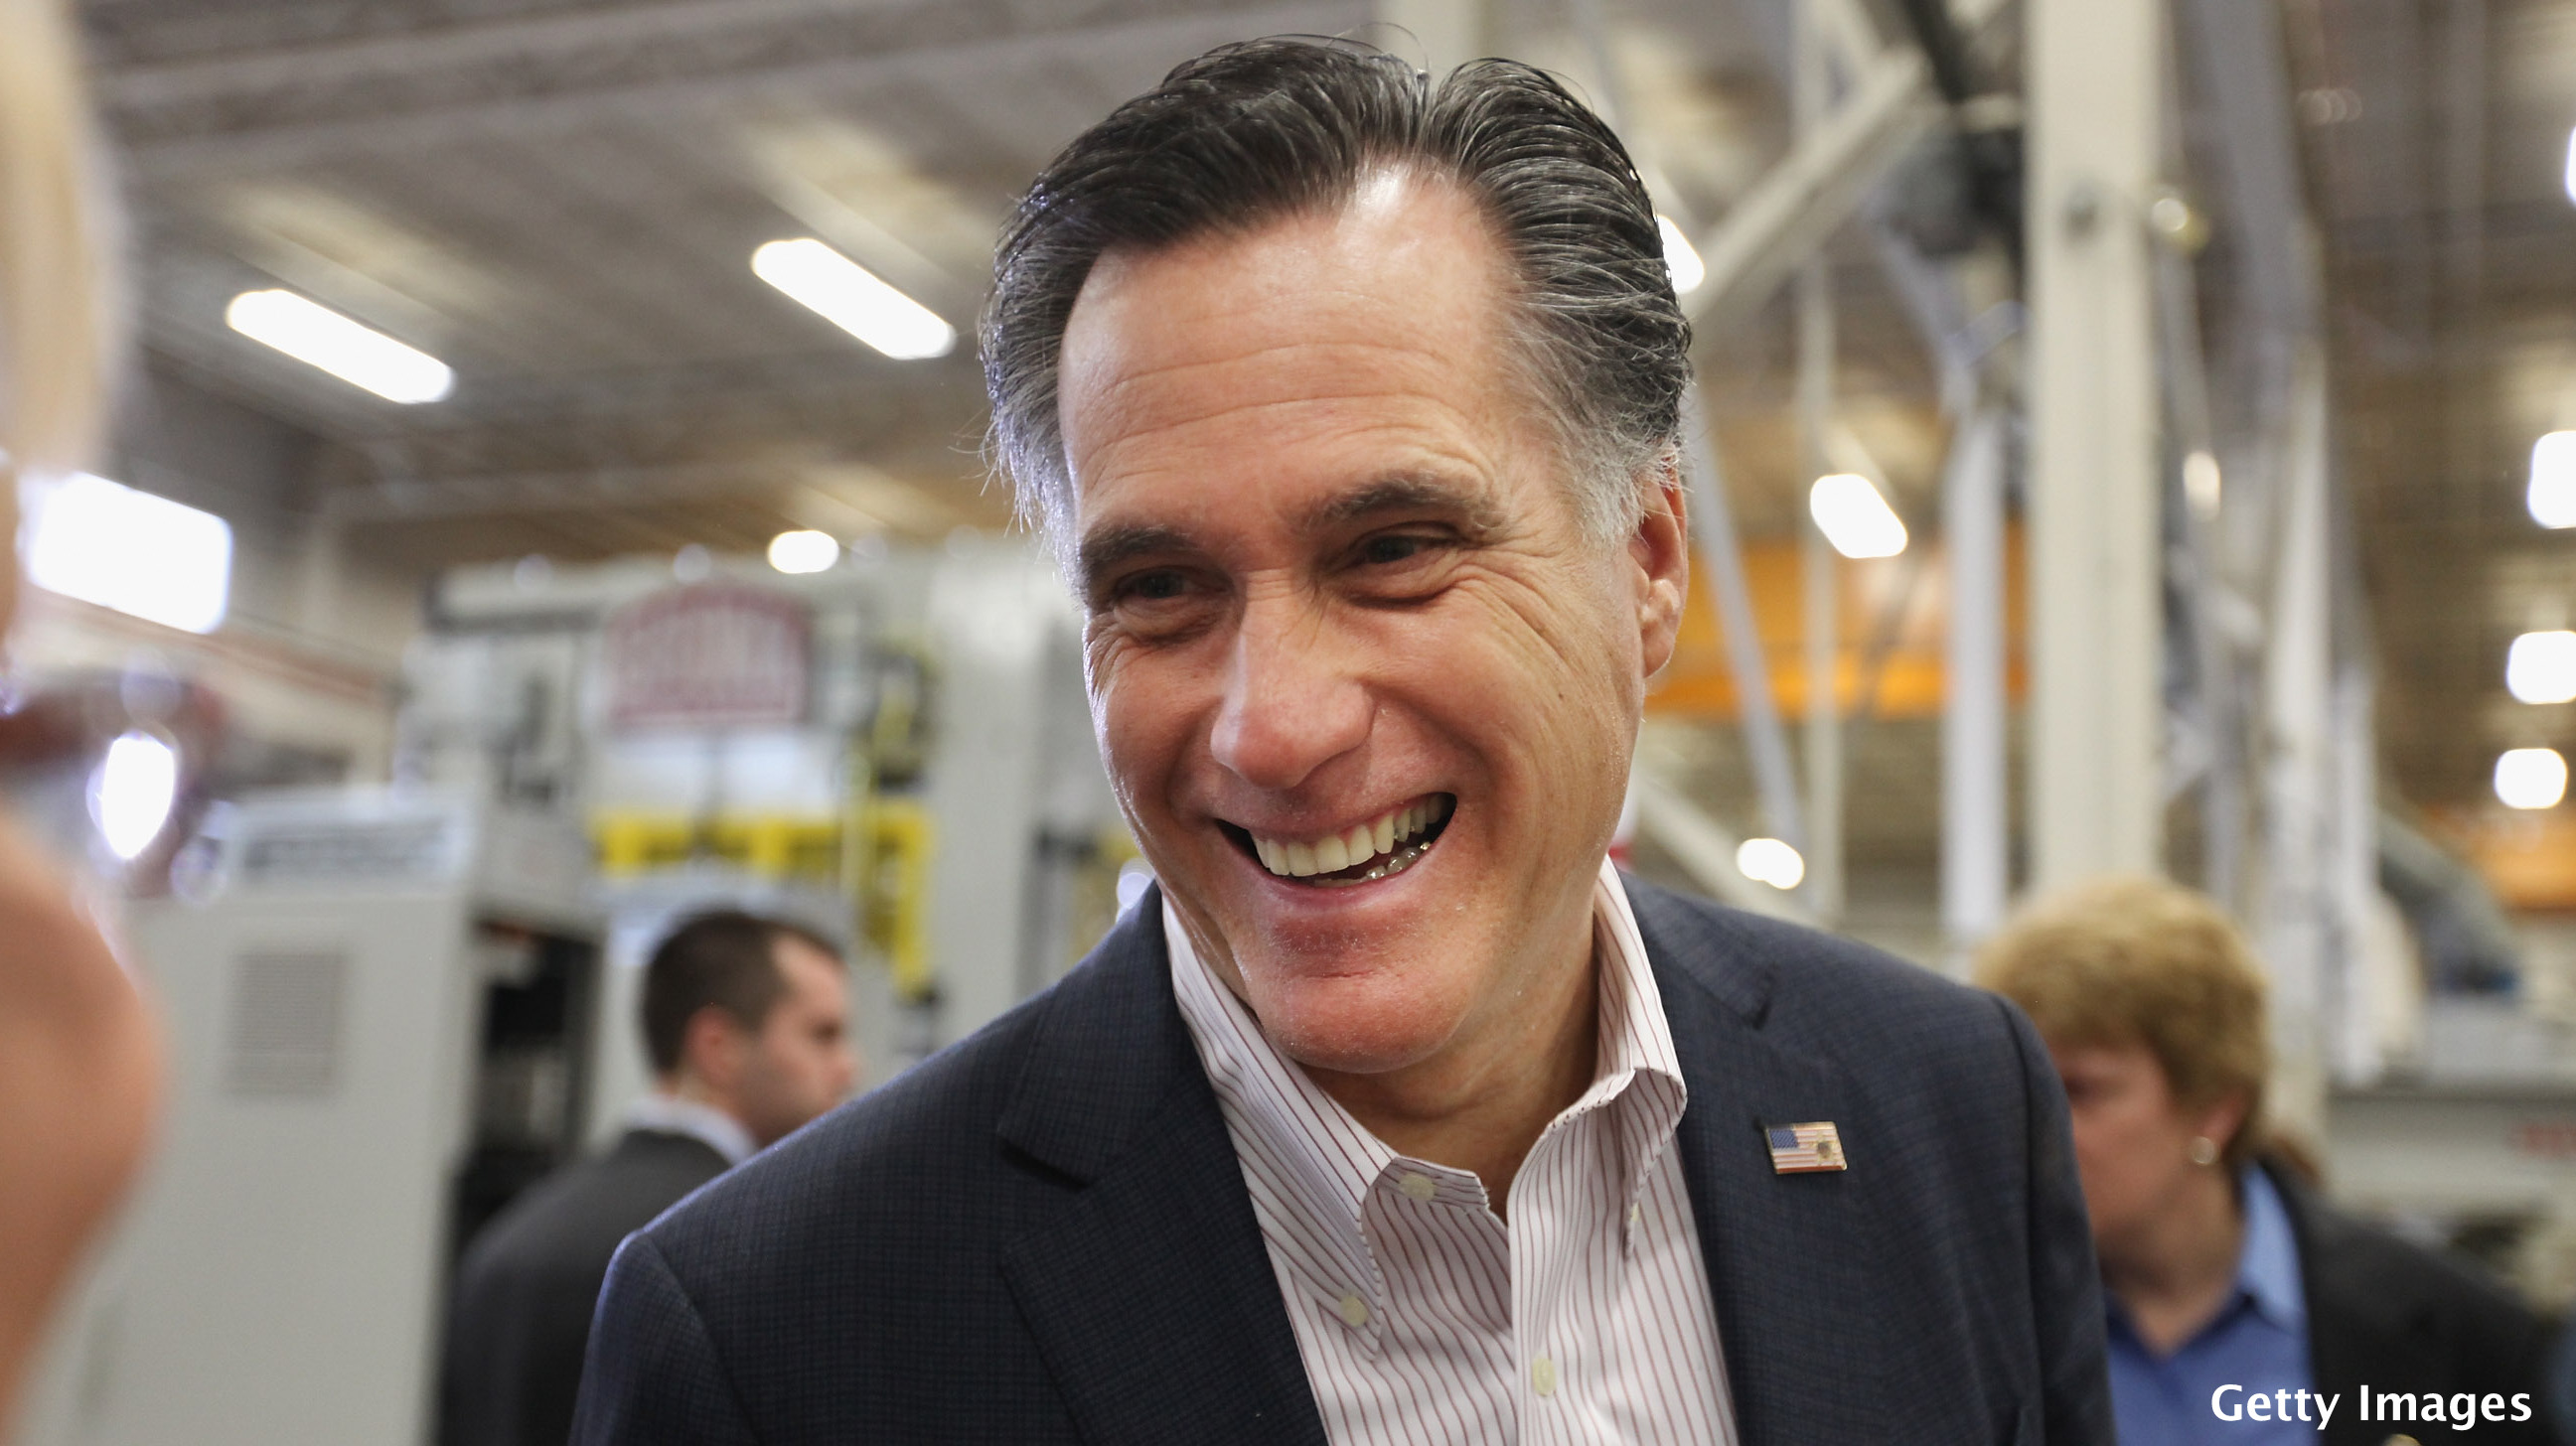 Romney pivots to general election mode